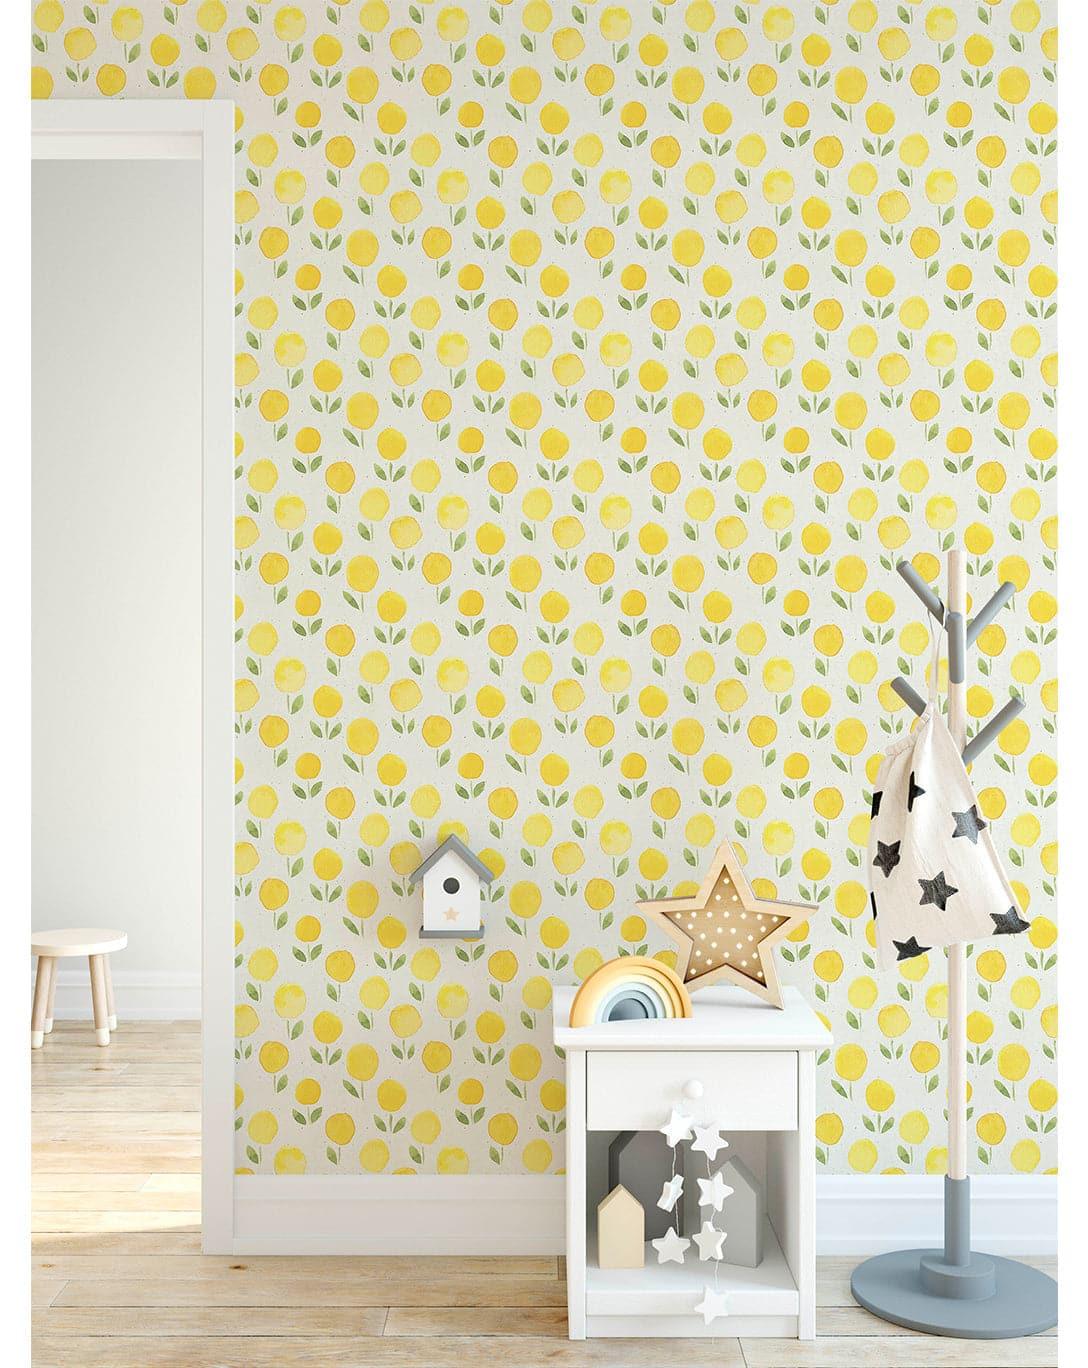 Yellow Marigold Flower Watercolor Floral Removable Wallpaper Yellow Marigold Flower Watercolor Floral Removable Wallpaper Yellow Marigold Flower Watercolor Floral Removable Wallpaper 